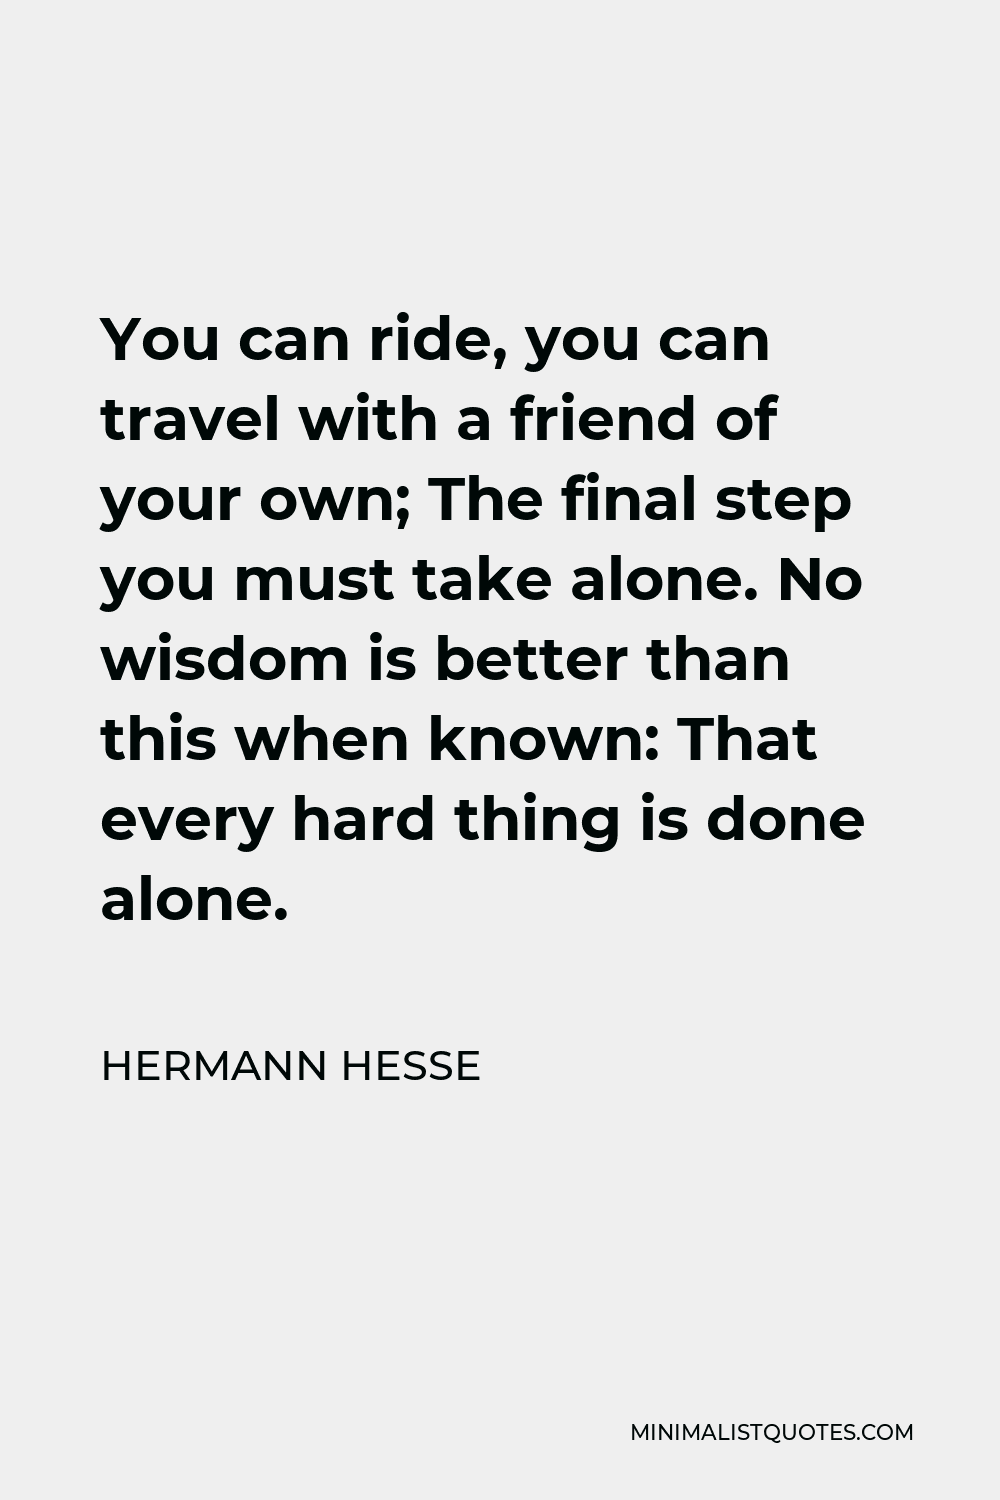 Hermann Hesse Quote - You can ride, you can travel with a friend of your own; The final step you must take alone. No wisdom is better than this when known: That every hard thing is done alone.